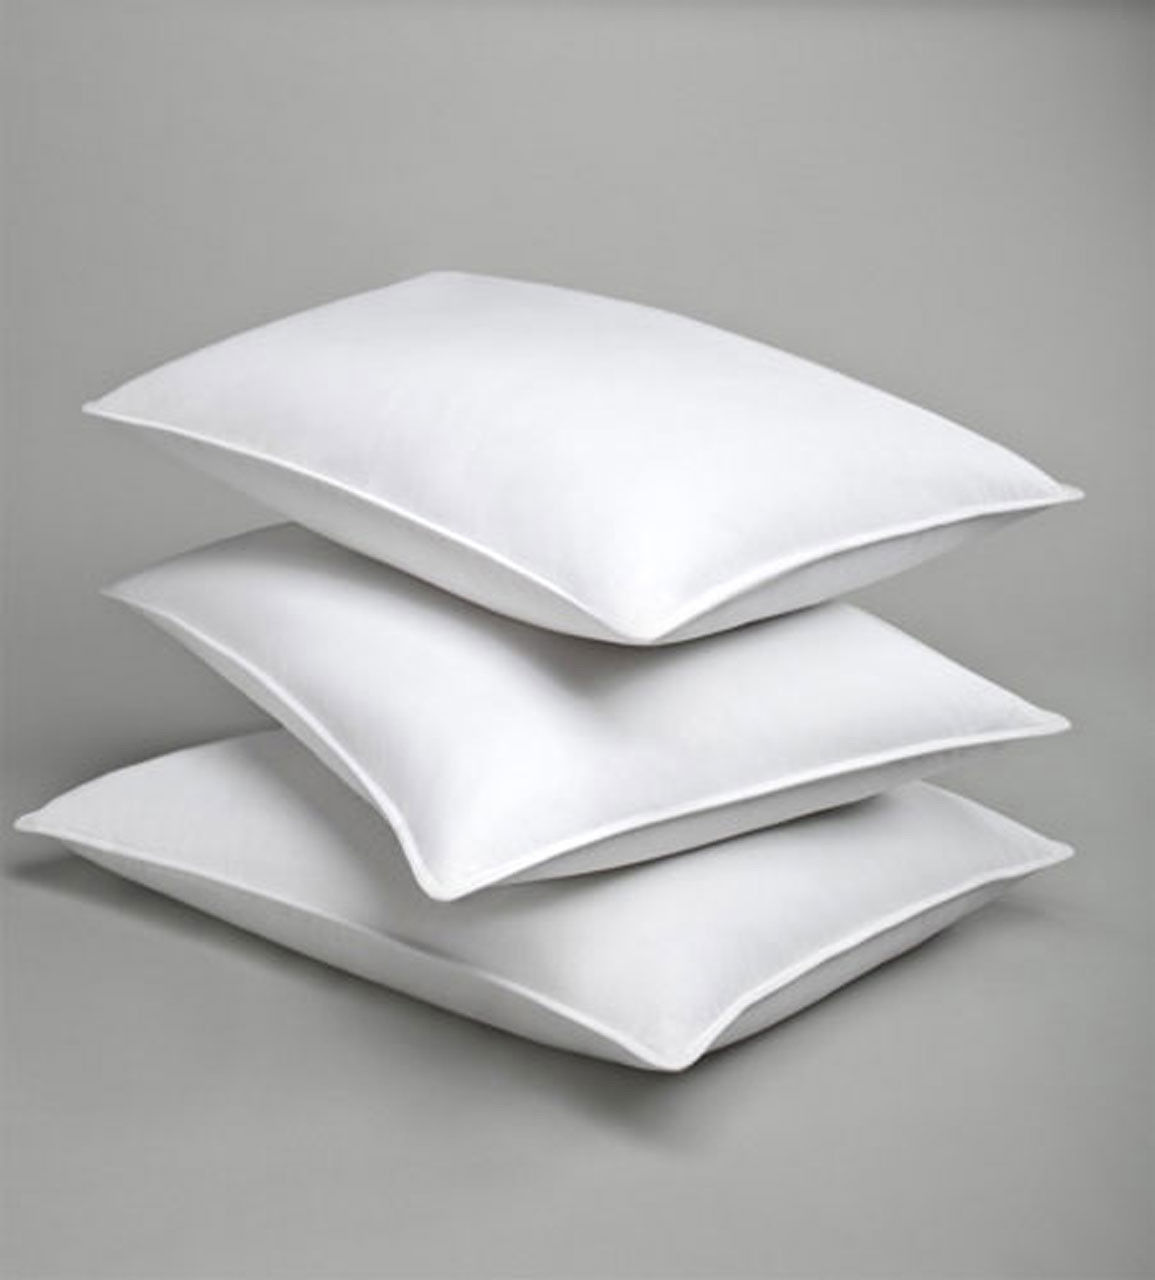 Can you list the materials used in the making of the ChamberLoft pillow?